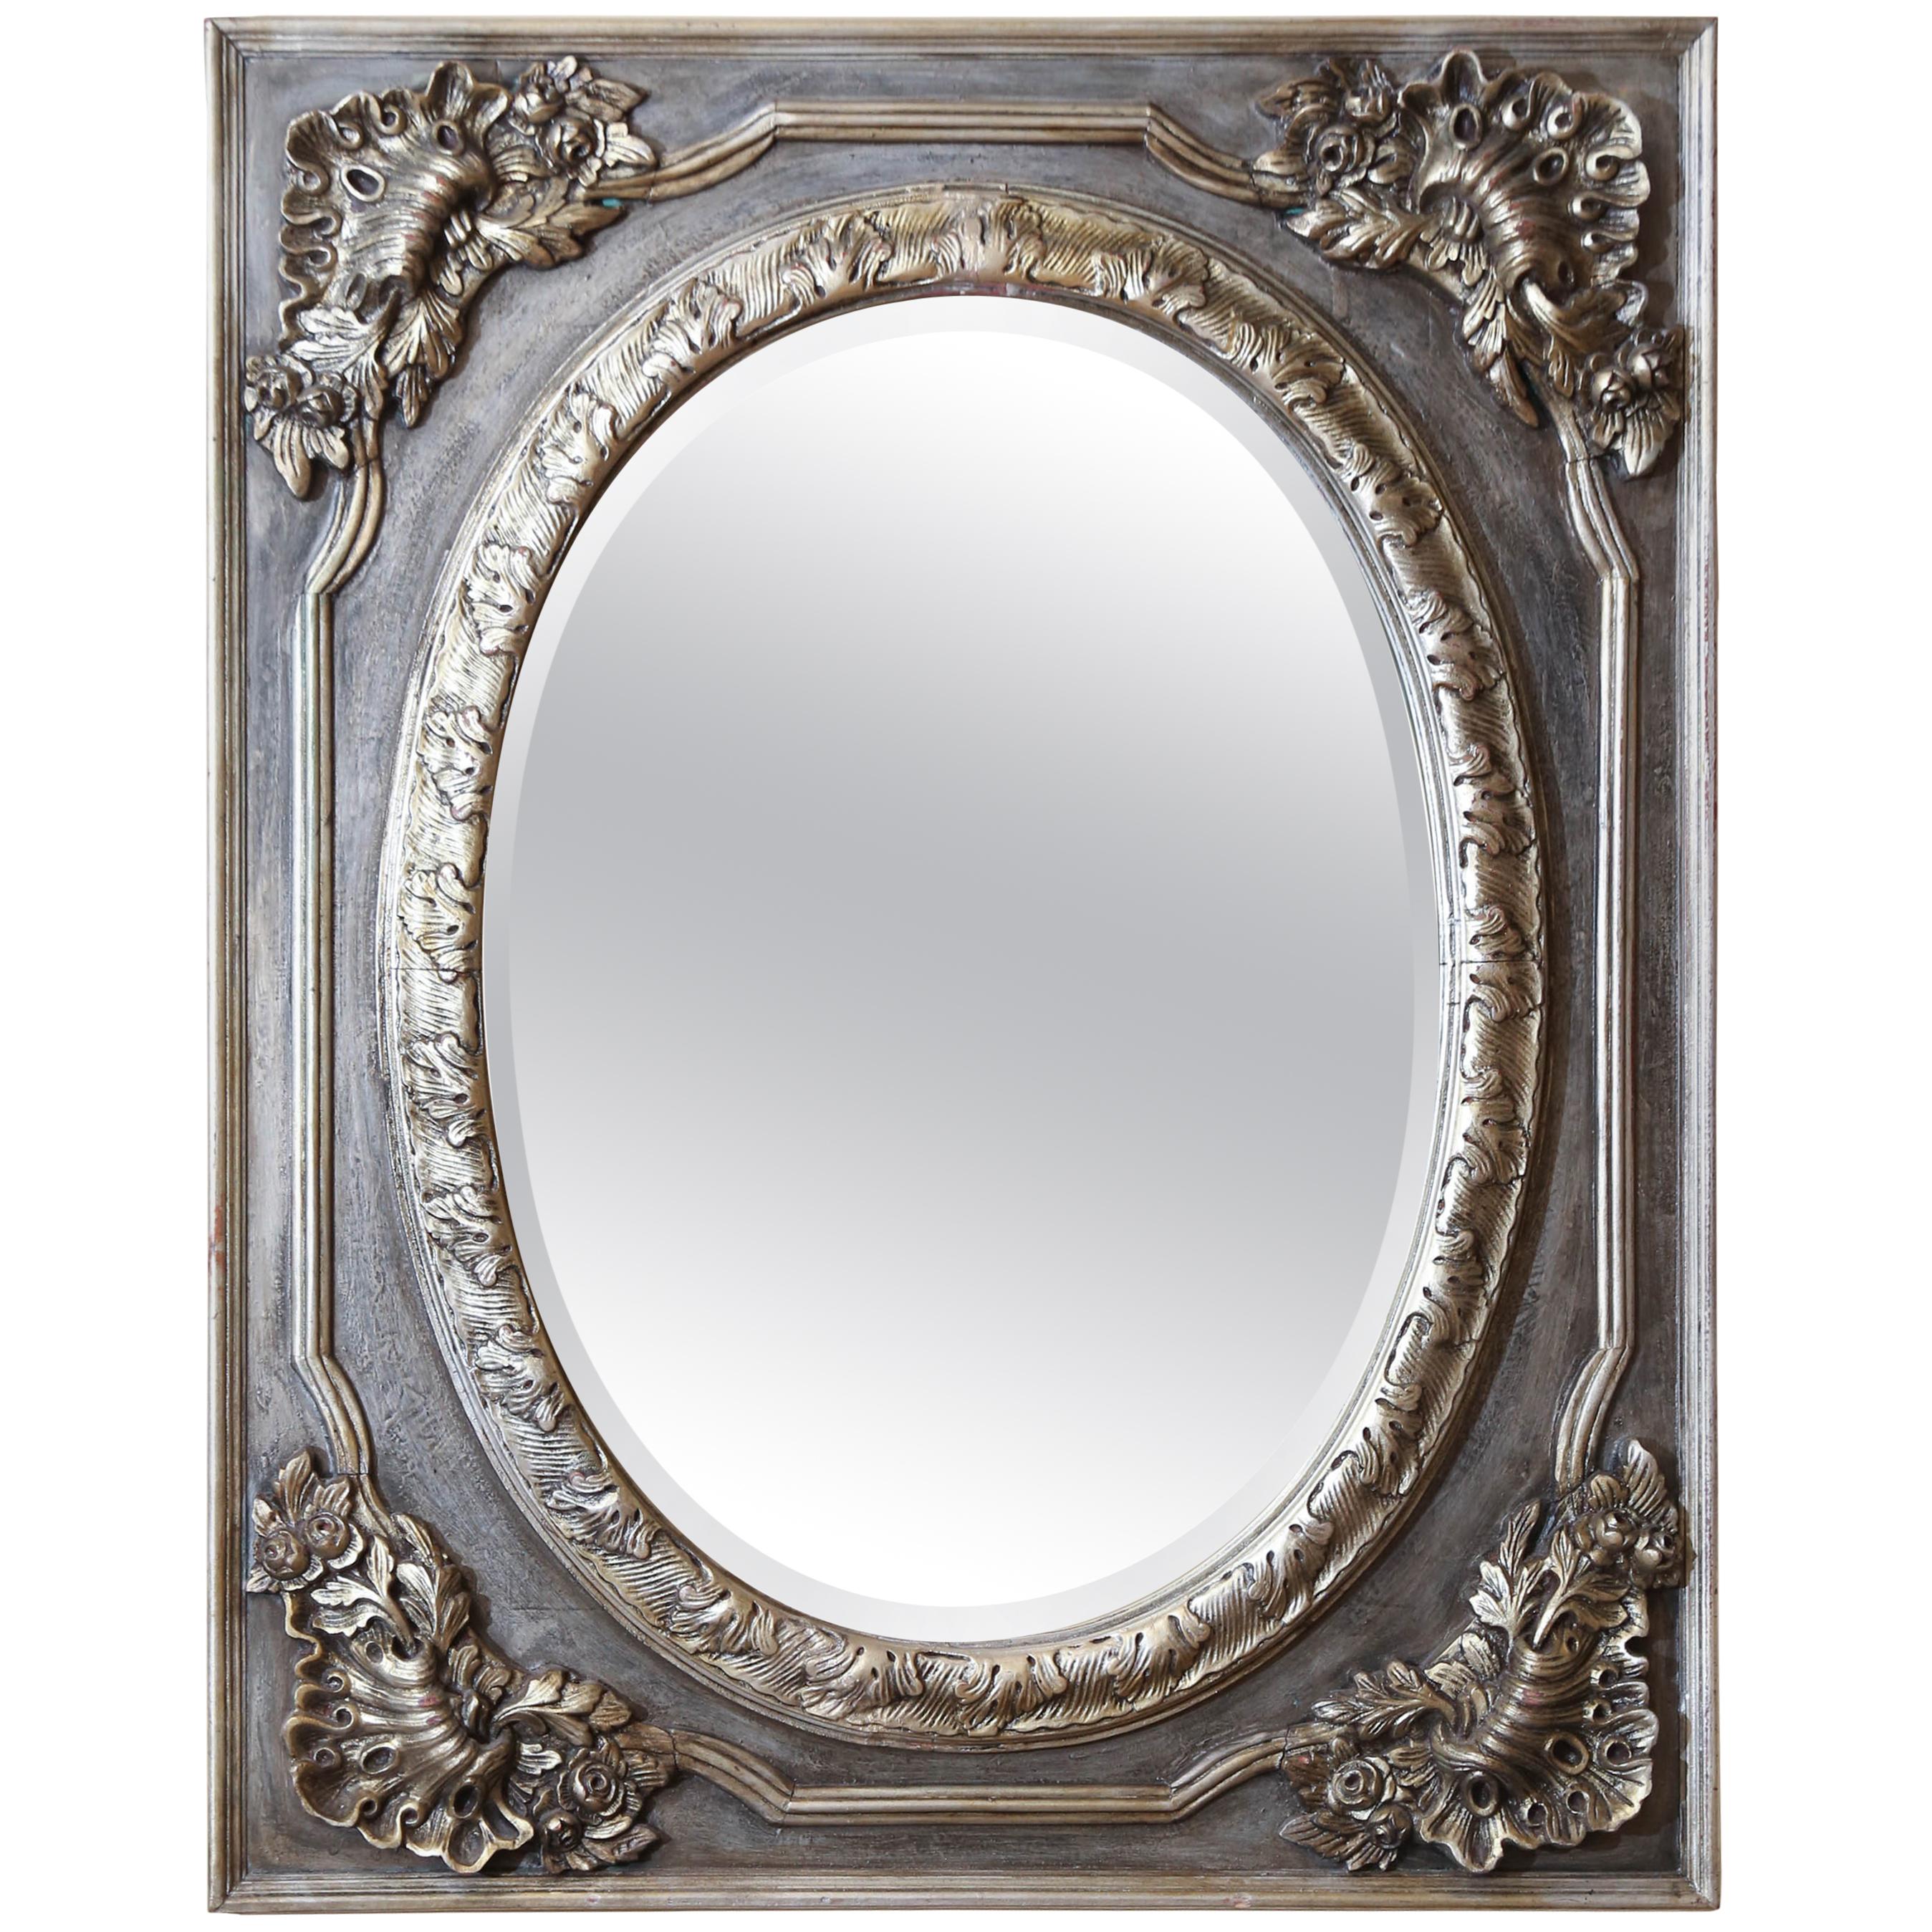  Pair of Painted and Silver Gilt frames  with  Oval Shaped mirrors